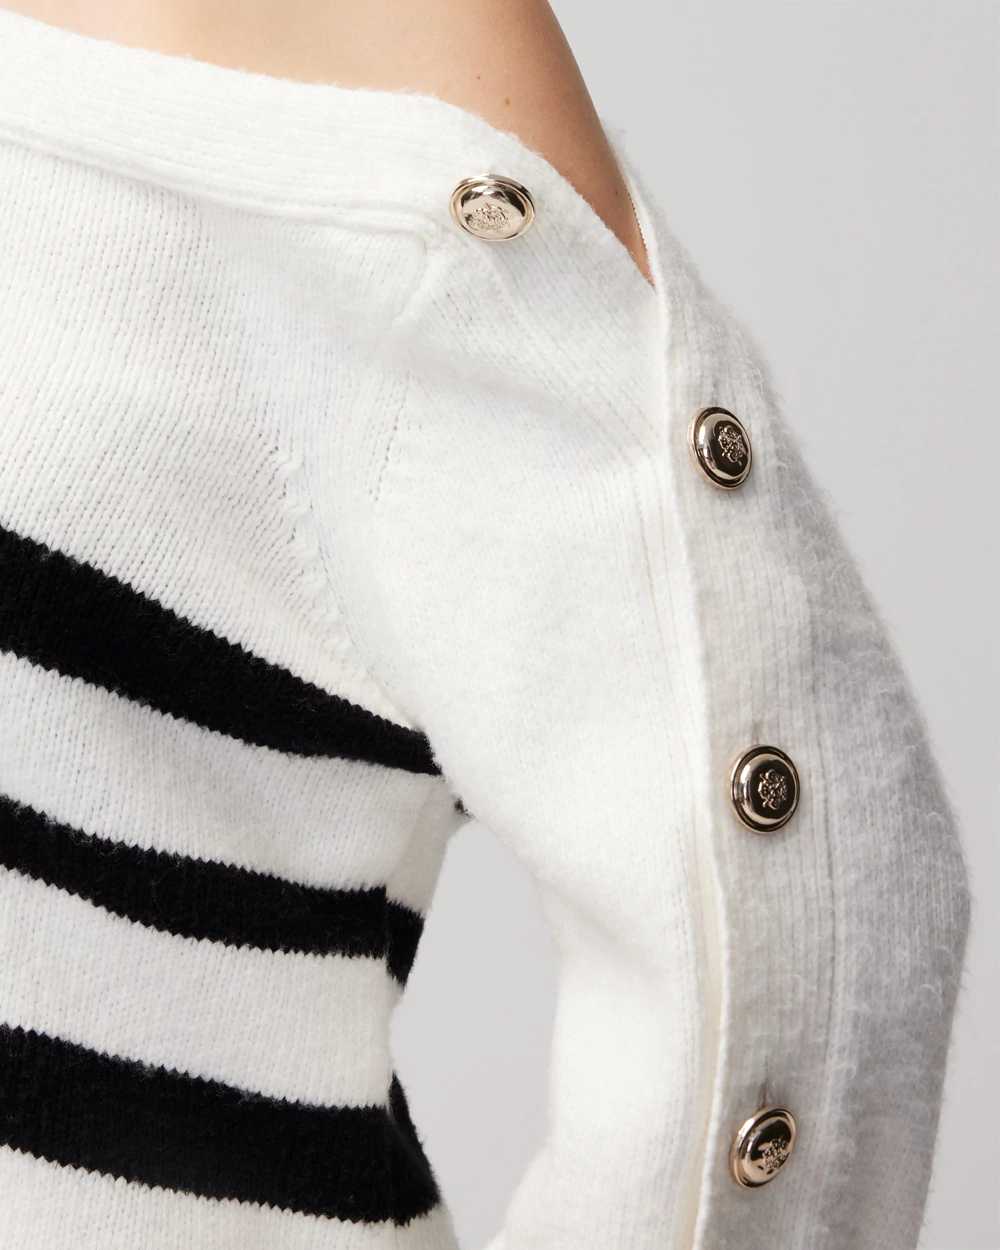 Stripe Asymmetrical Button Pullover Sweater click to view larger image.